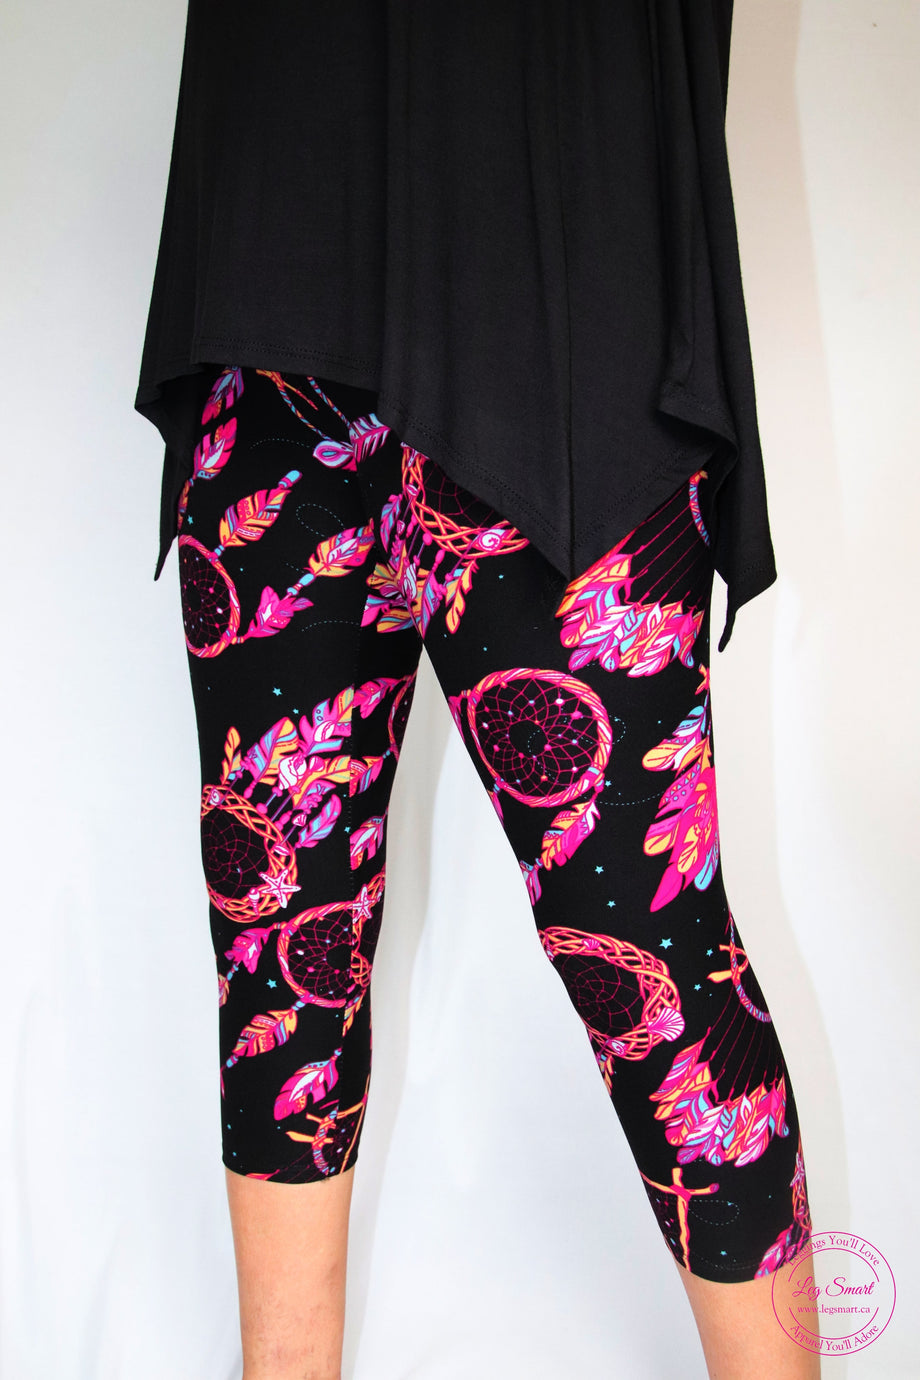 Buttery Smooth Monochrome Floral Paisley Extra Plus Size Leggings